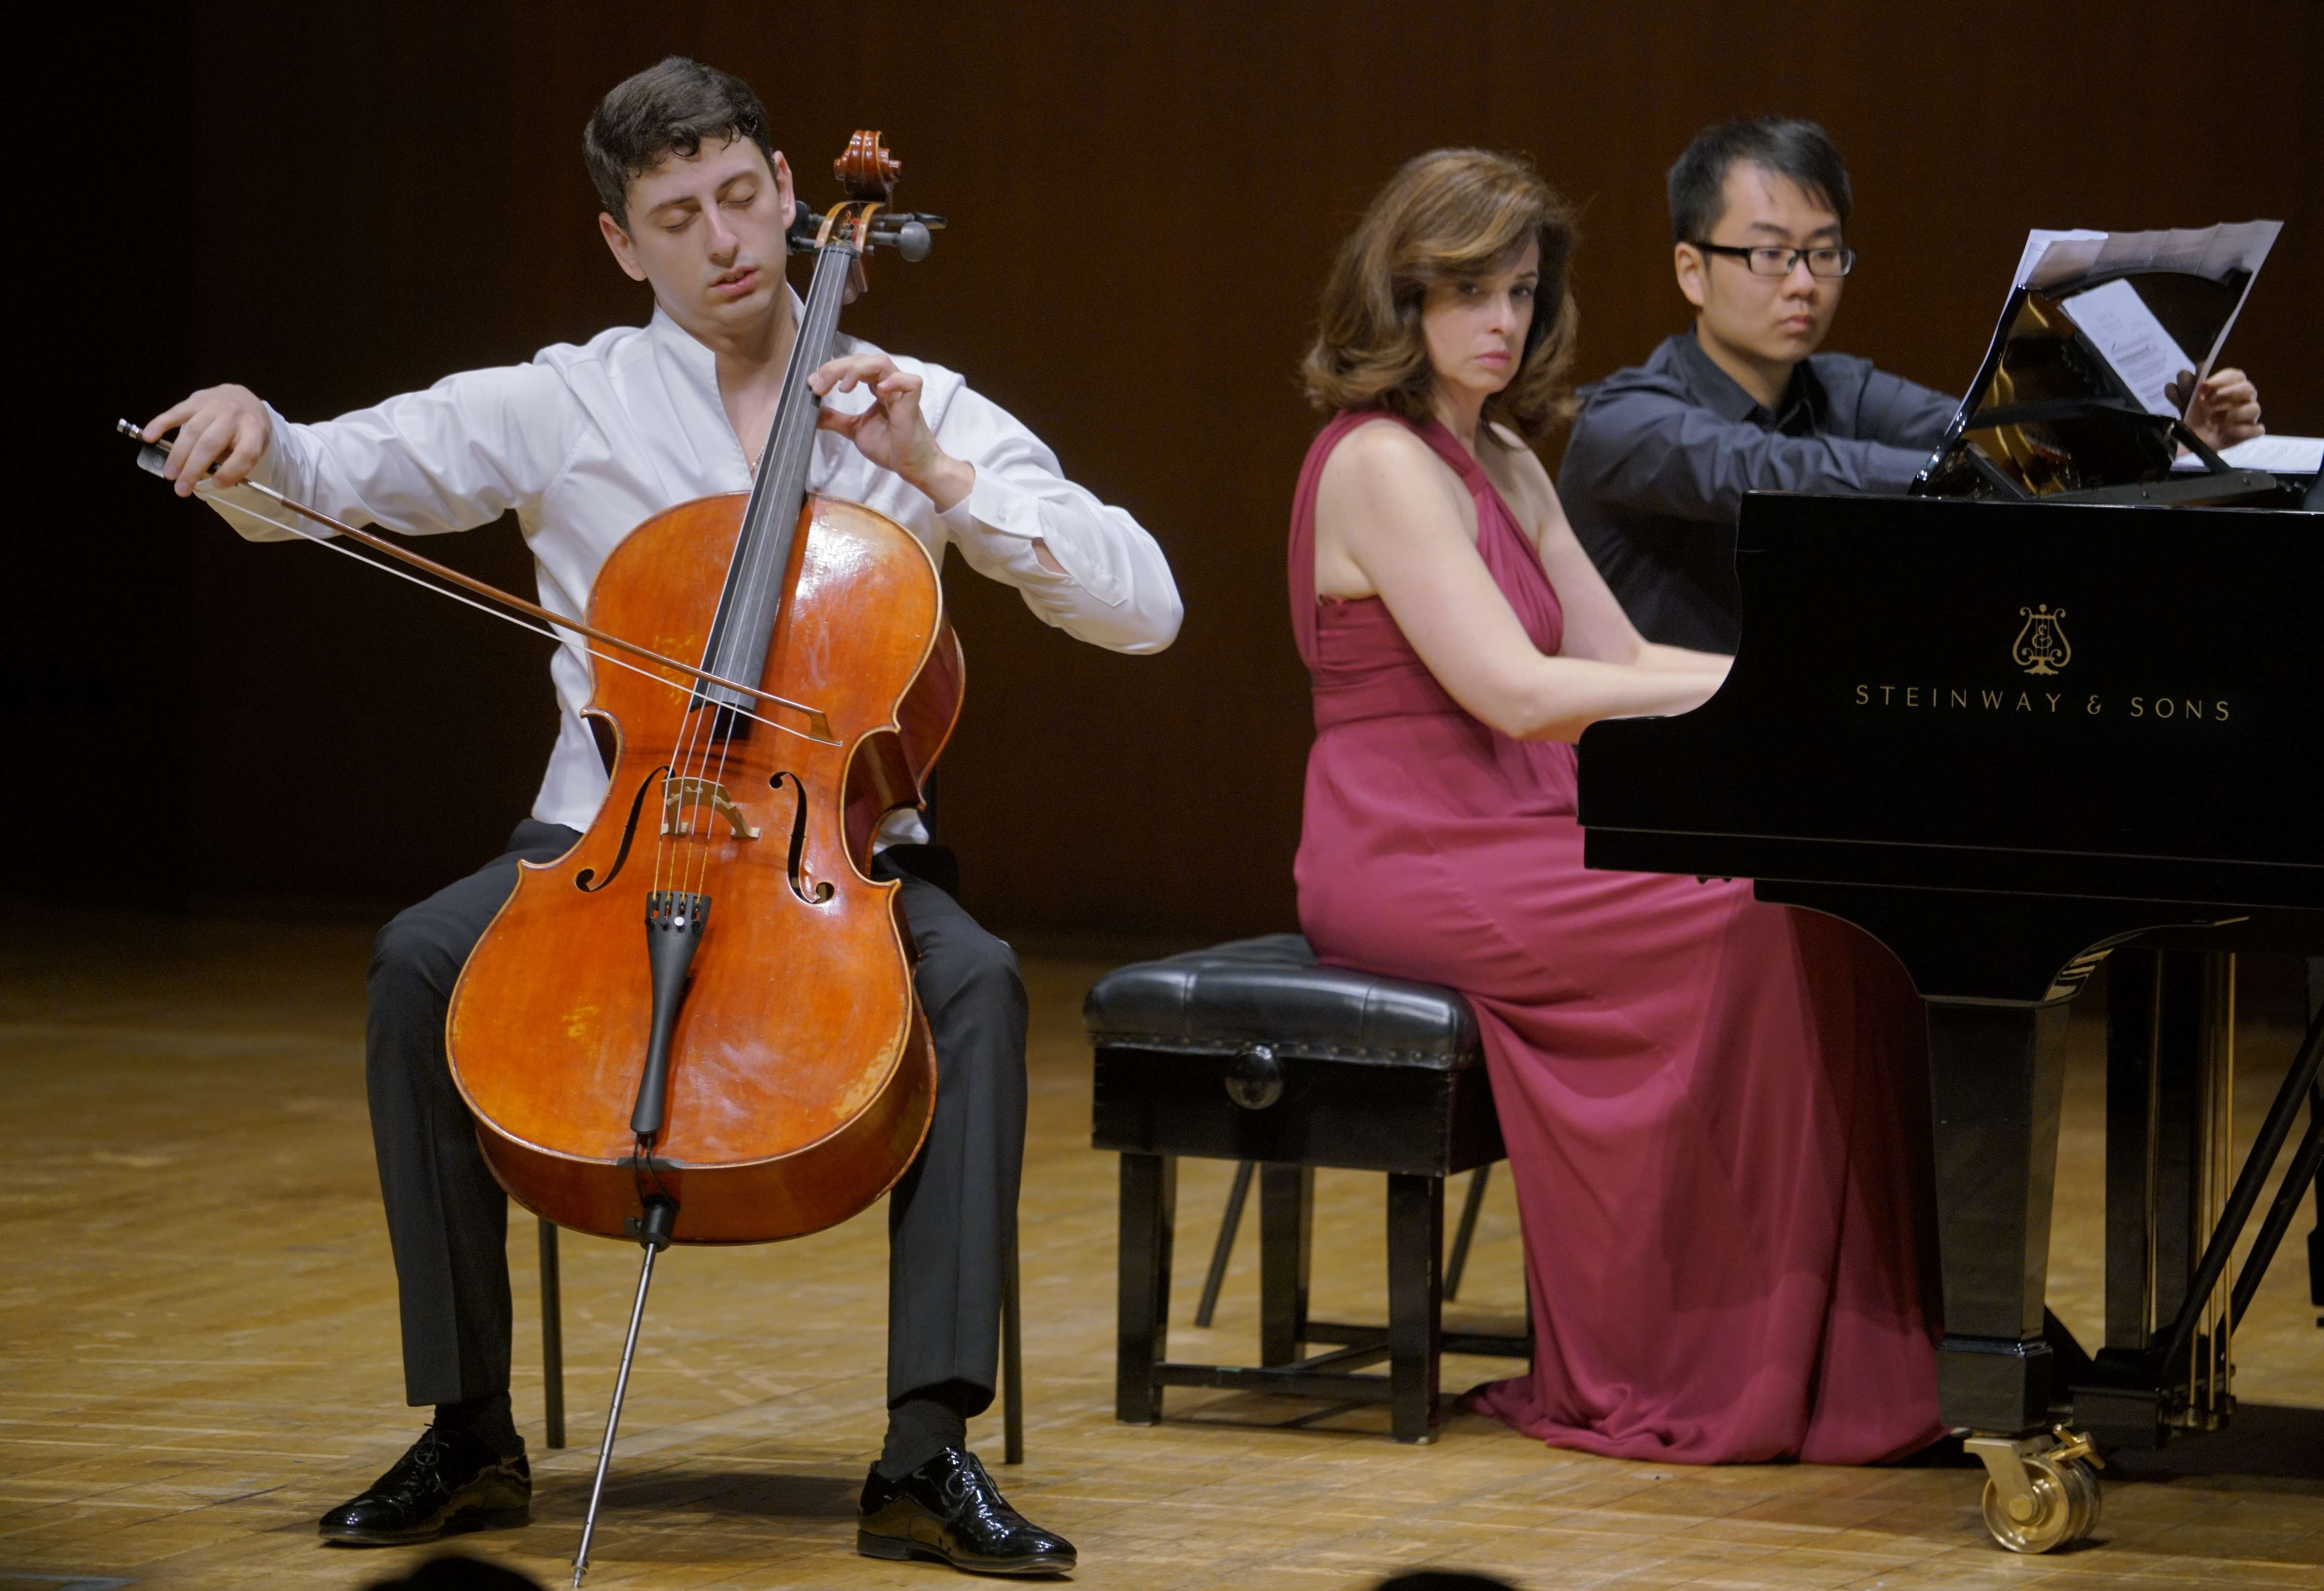 The first singing note from the cello of Narek Hakhnazaryan seemed to expand the concert hall itself. Accompanying the young Armenian on the piano, Noreen Polera was integral to the success of his Hong Kong debut. Photos: Premiere Performances of Hong Kong